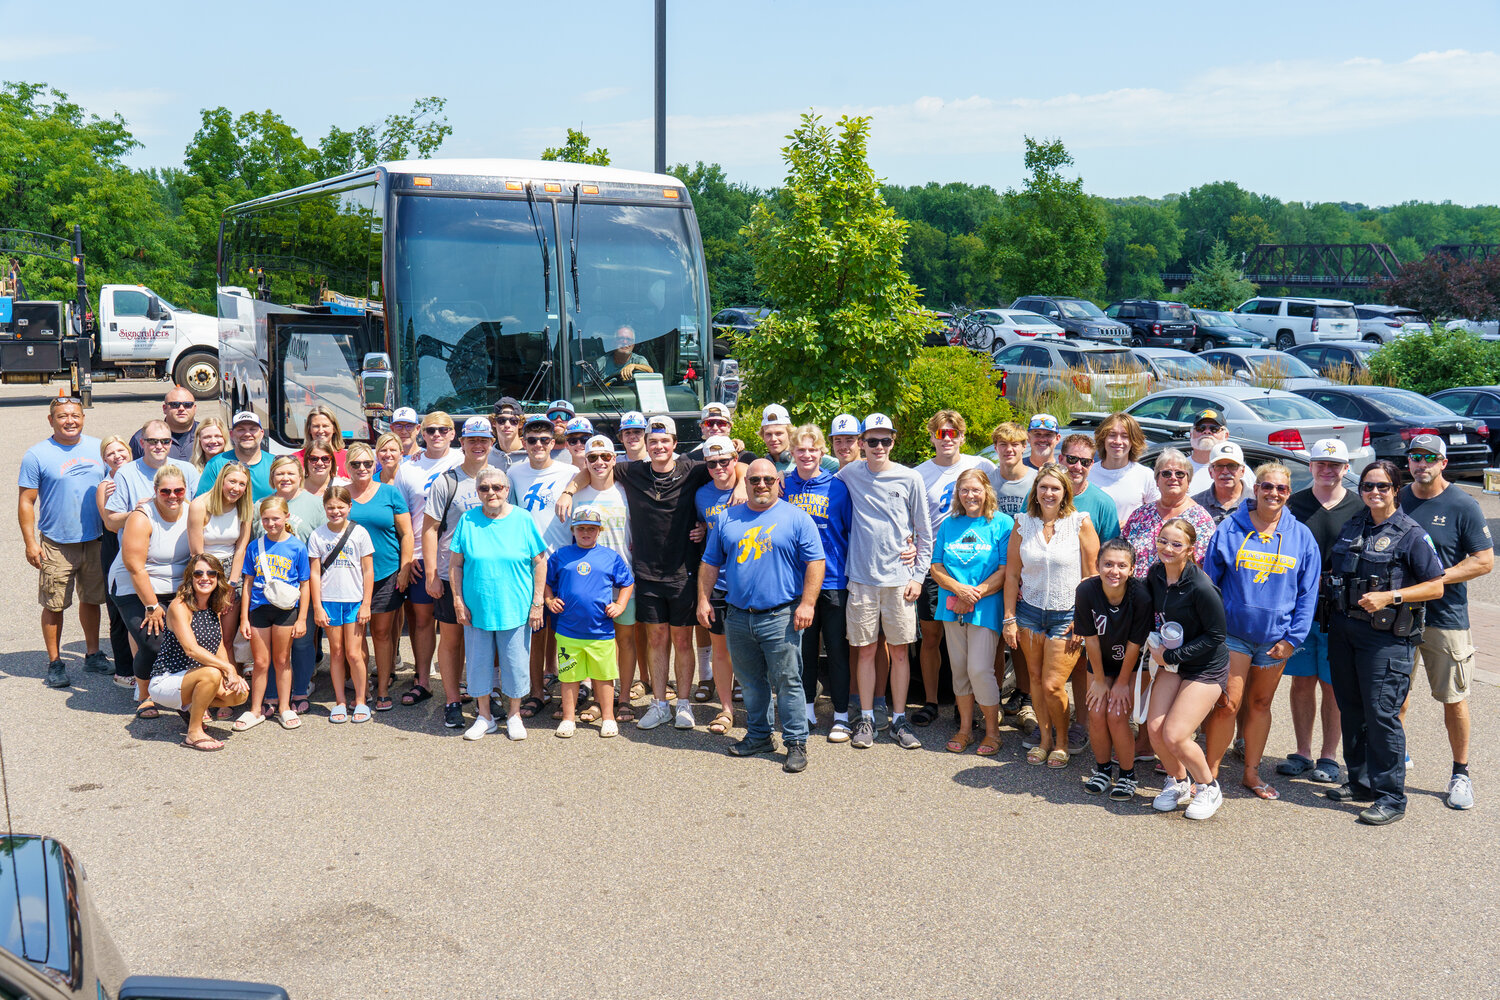 The Raiders were sent off in style on Wednesday in a coach bus from Minnesota Coaches. The team was escorted out of town by members of the Hastings Police, Fire and EMS as well as two officers from Eagan and Burnsville Police Departments who are parents of a player.